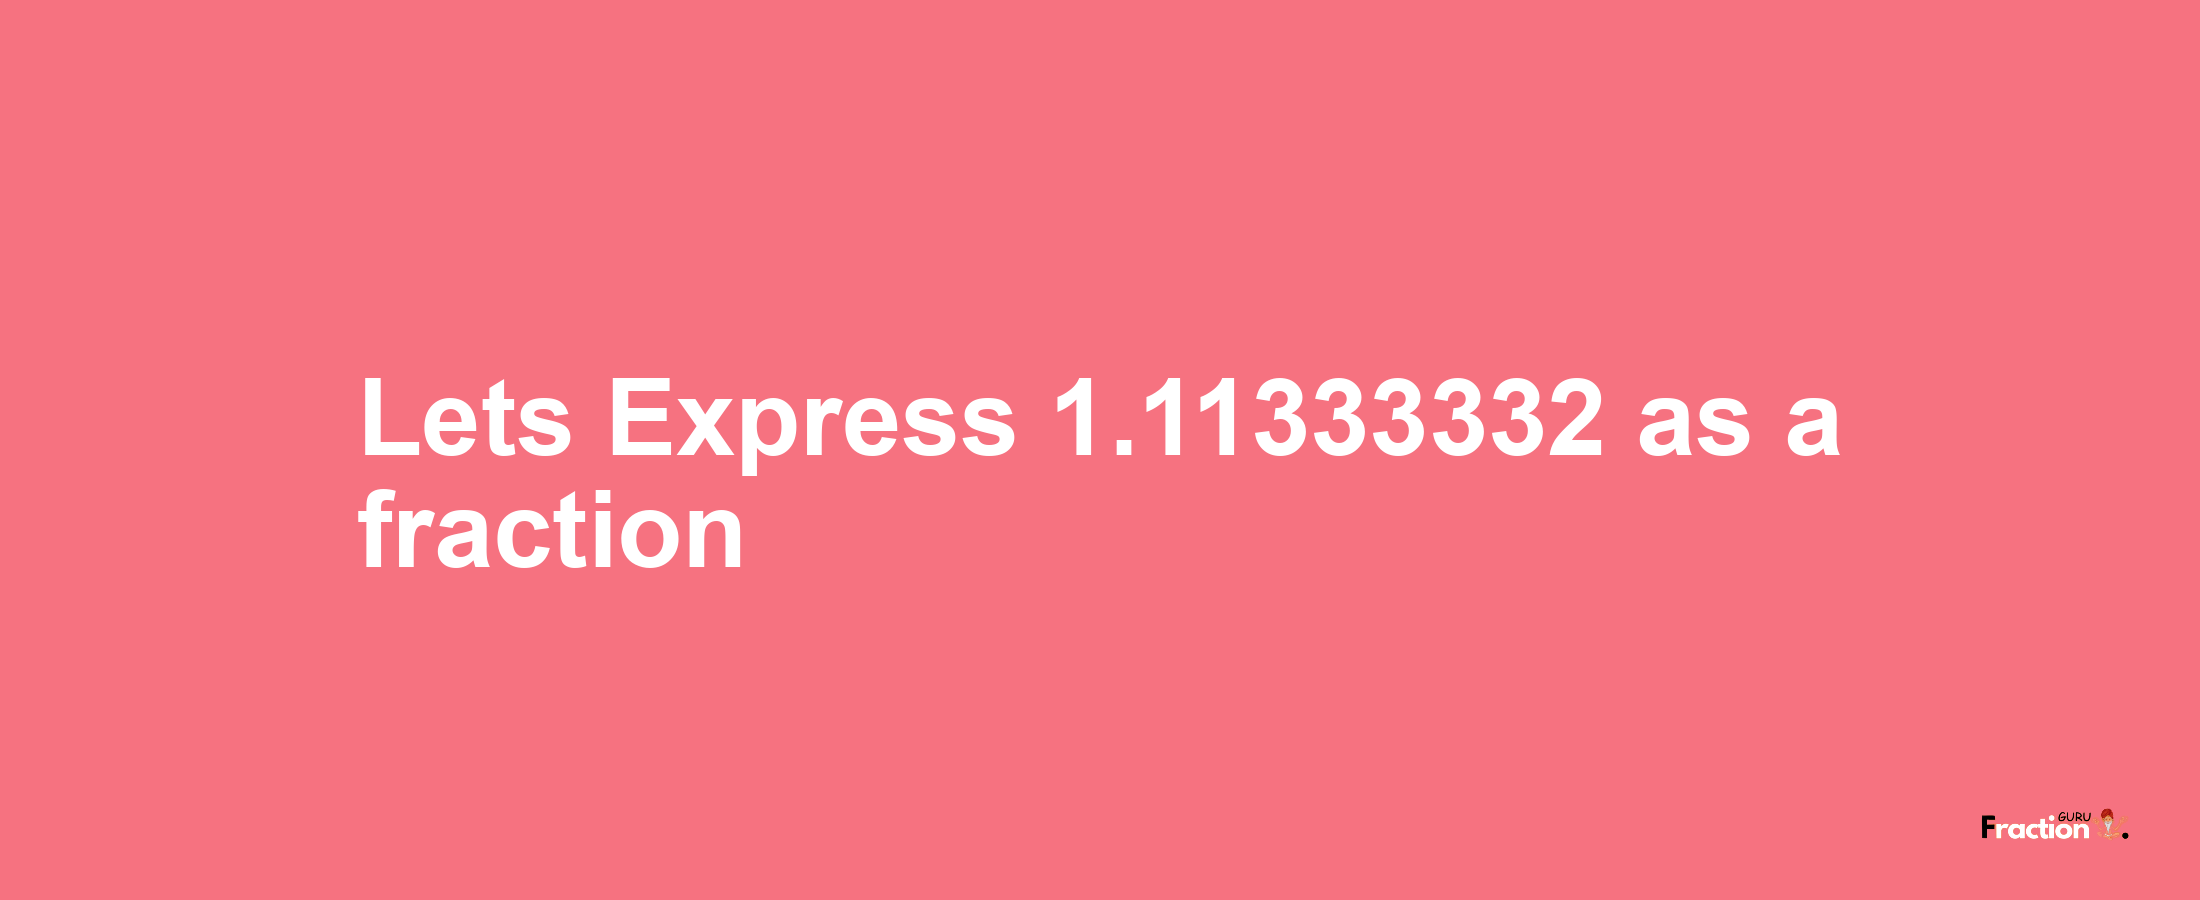 Lets Express 1.11333332 as afraction